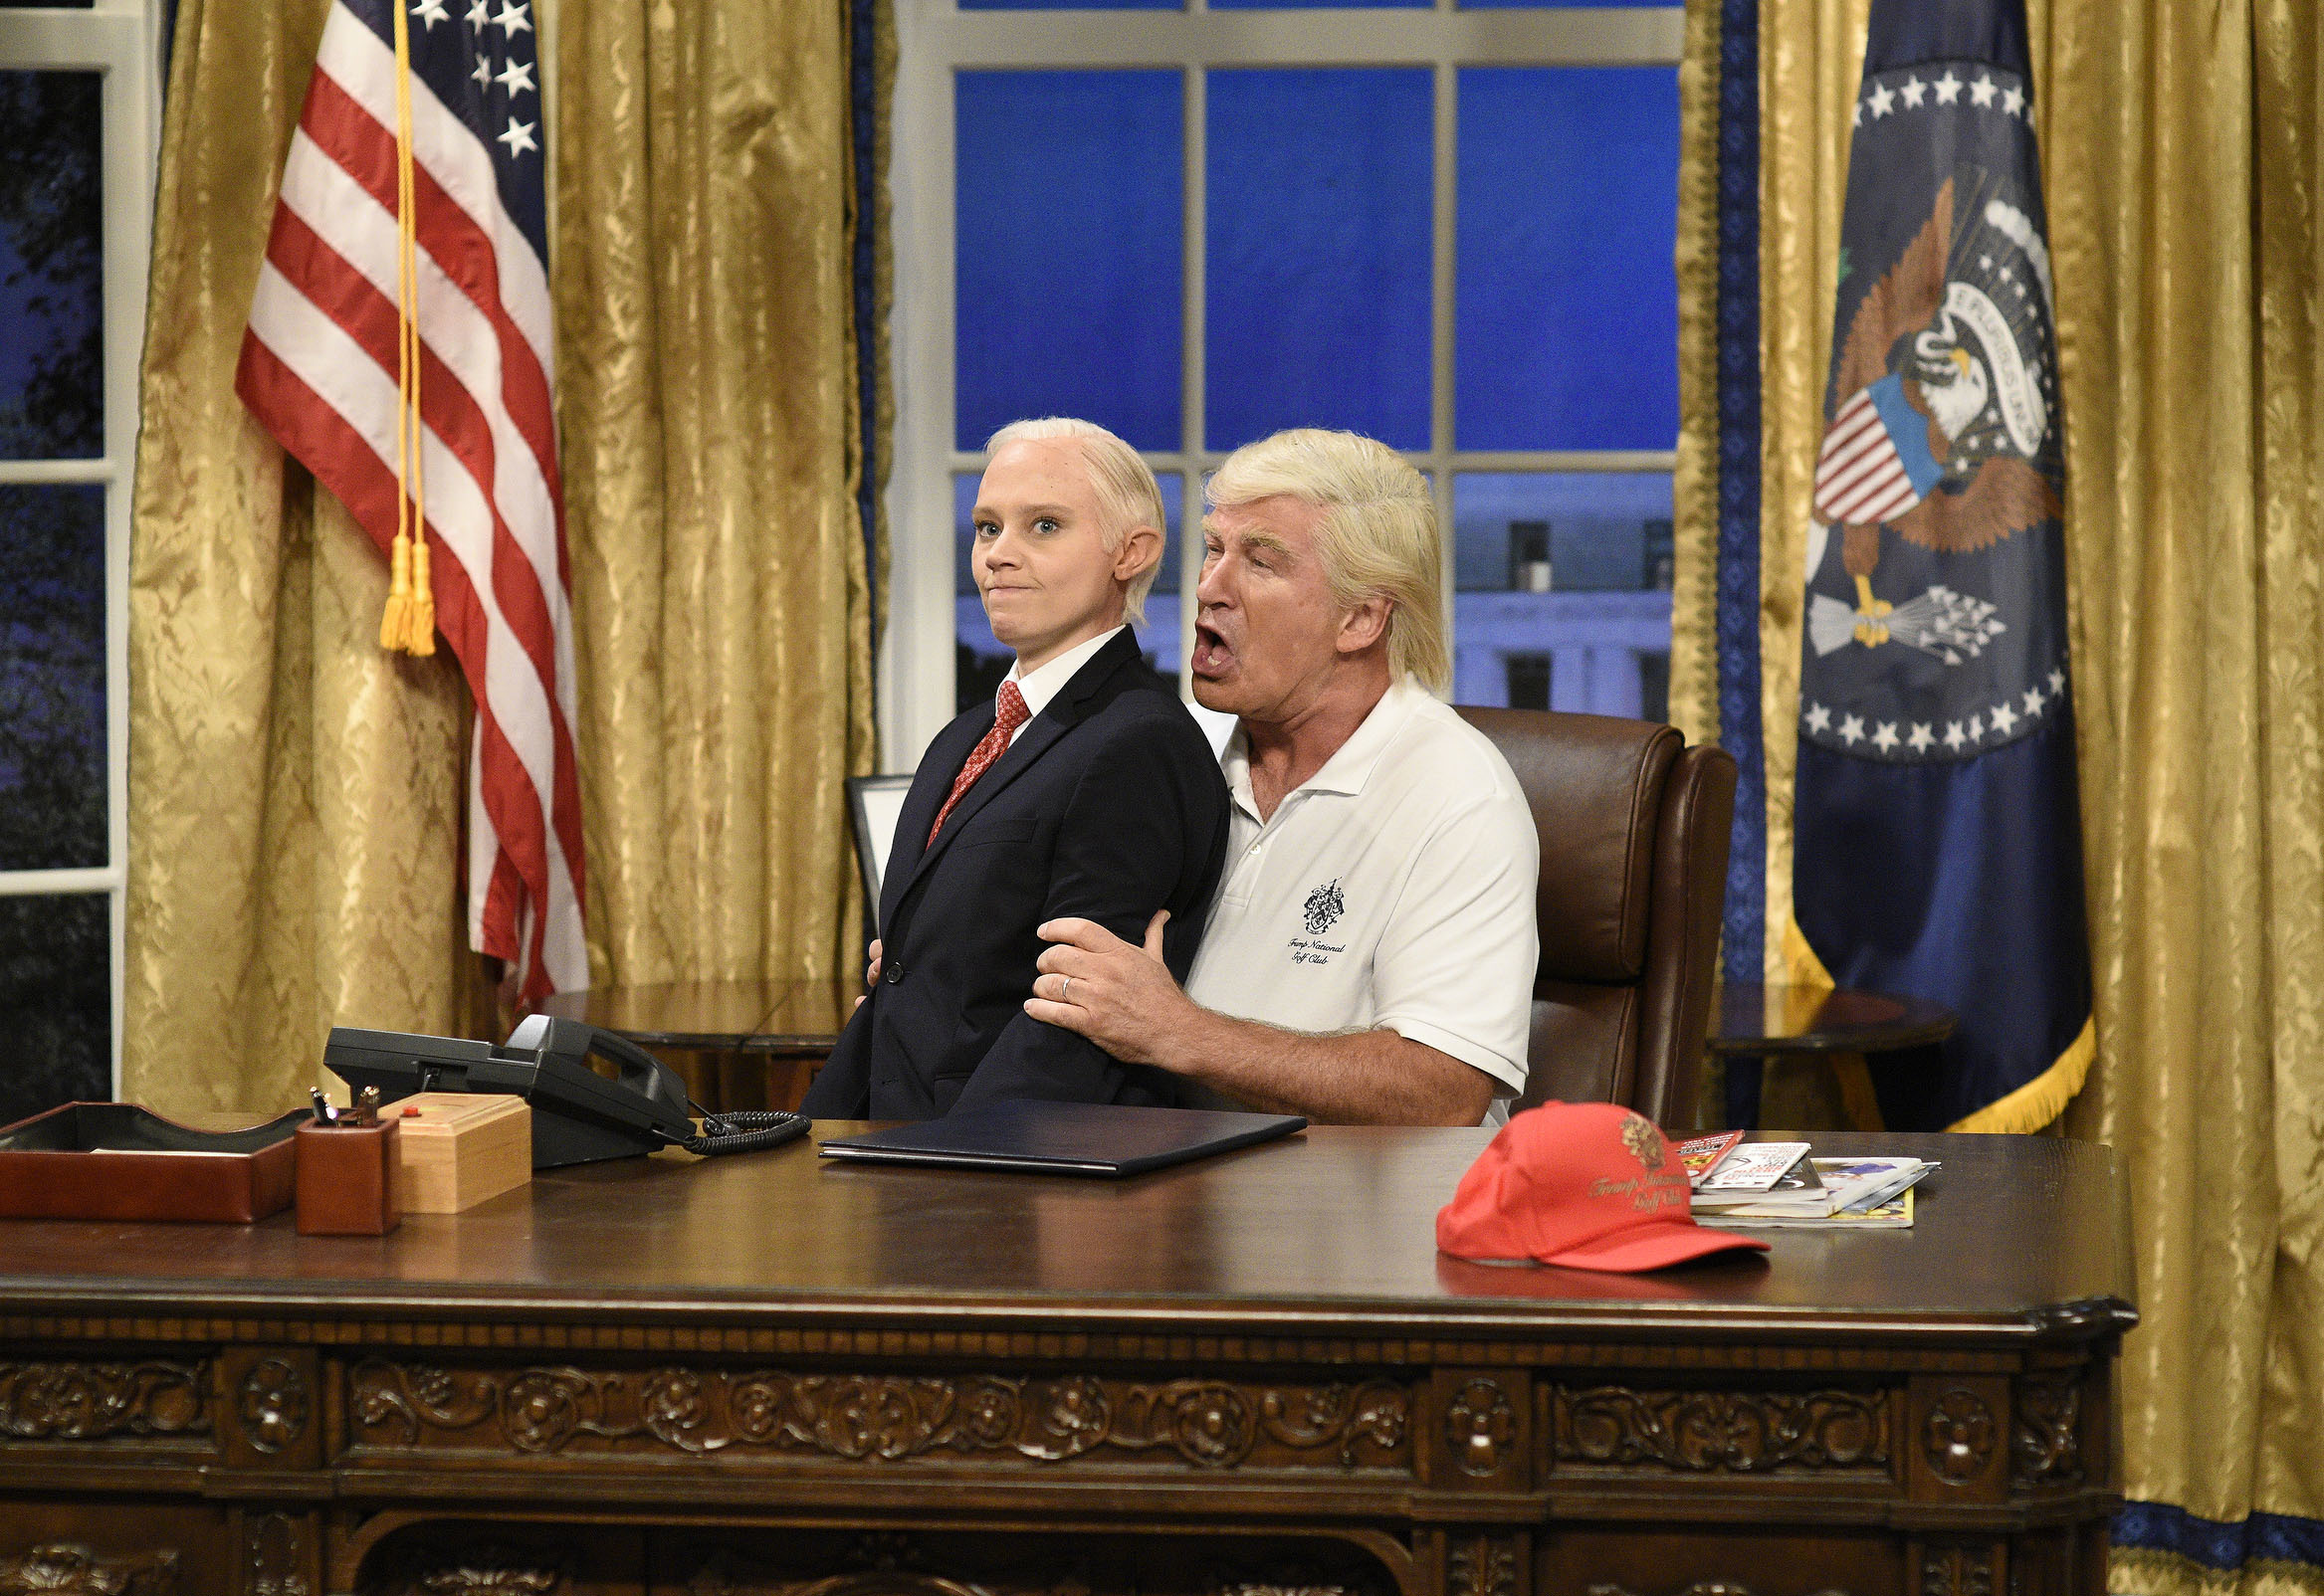 PHOTO: In this image released by NBC, Kate McKinnon portrays Attorney General Jeff Sessions, left, and Alec Baldwin portrays President Donald Trump during the cold open for "Saturday Night Live," on Sept. 30, 2017, in New York.